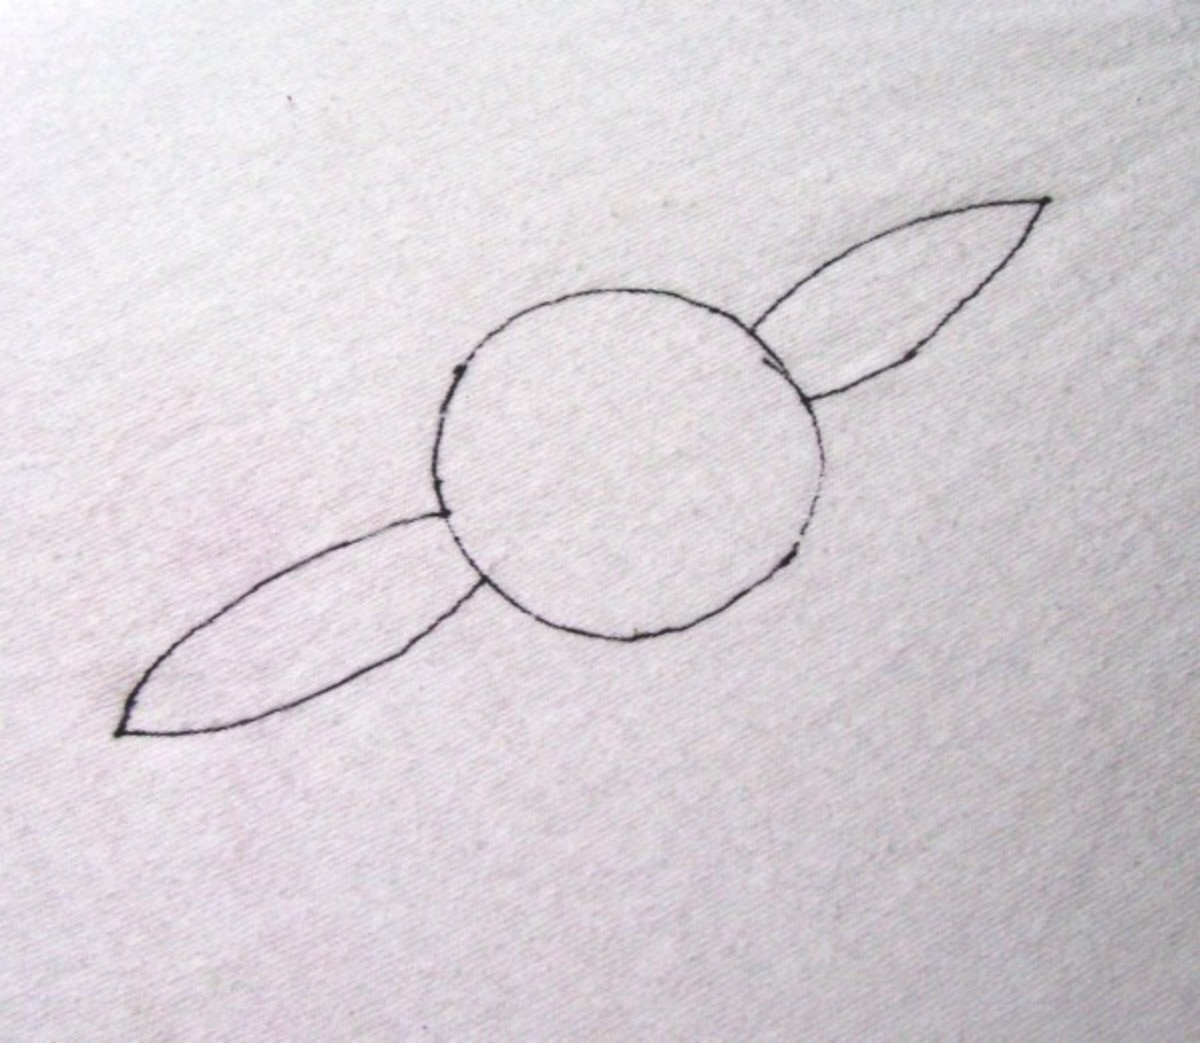 Draw the first petals opposite each other to help achieve good spacing and balance.